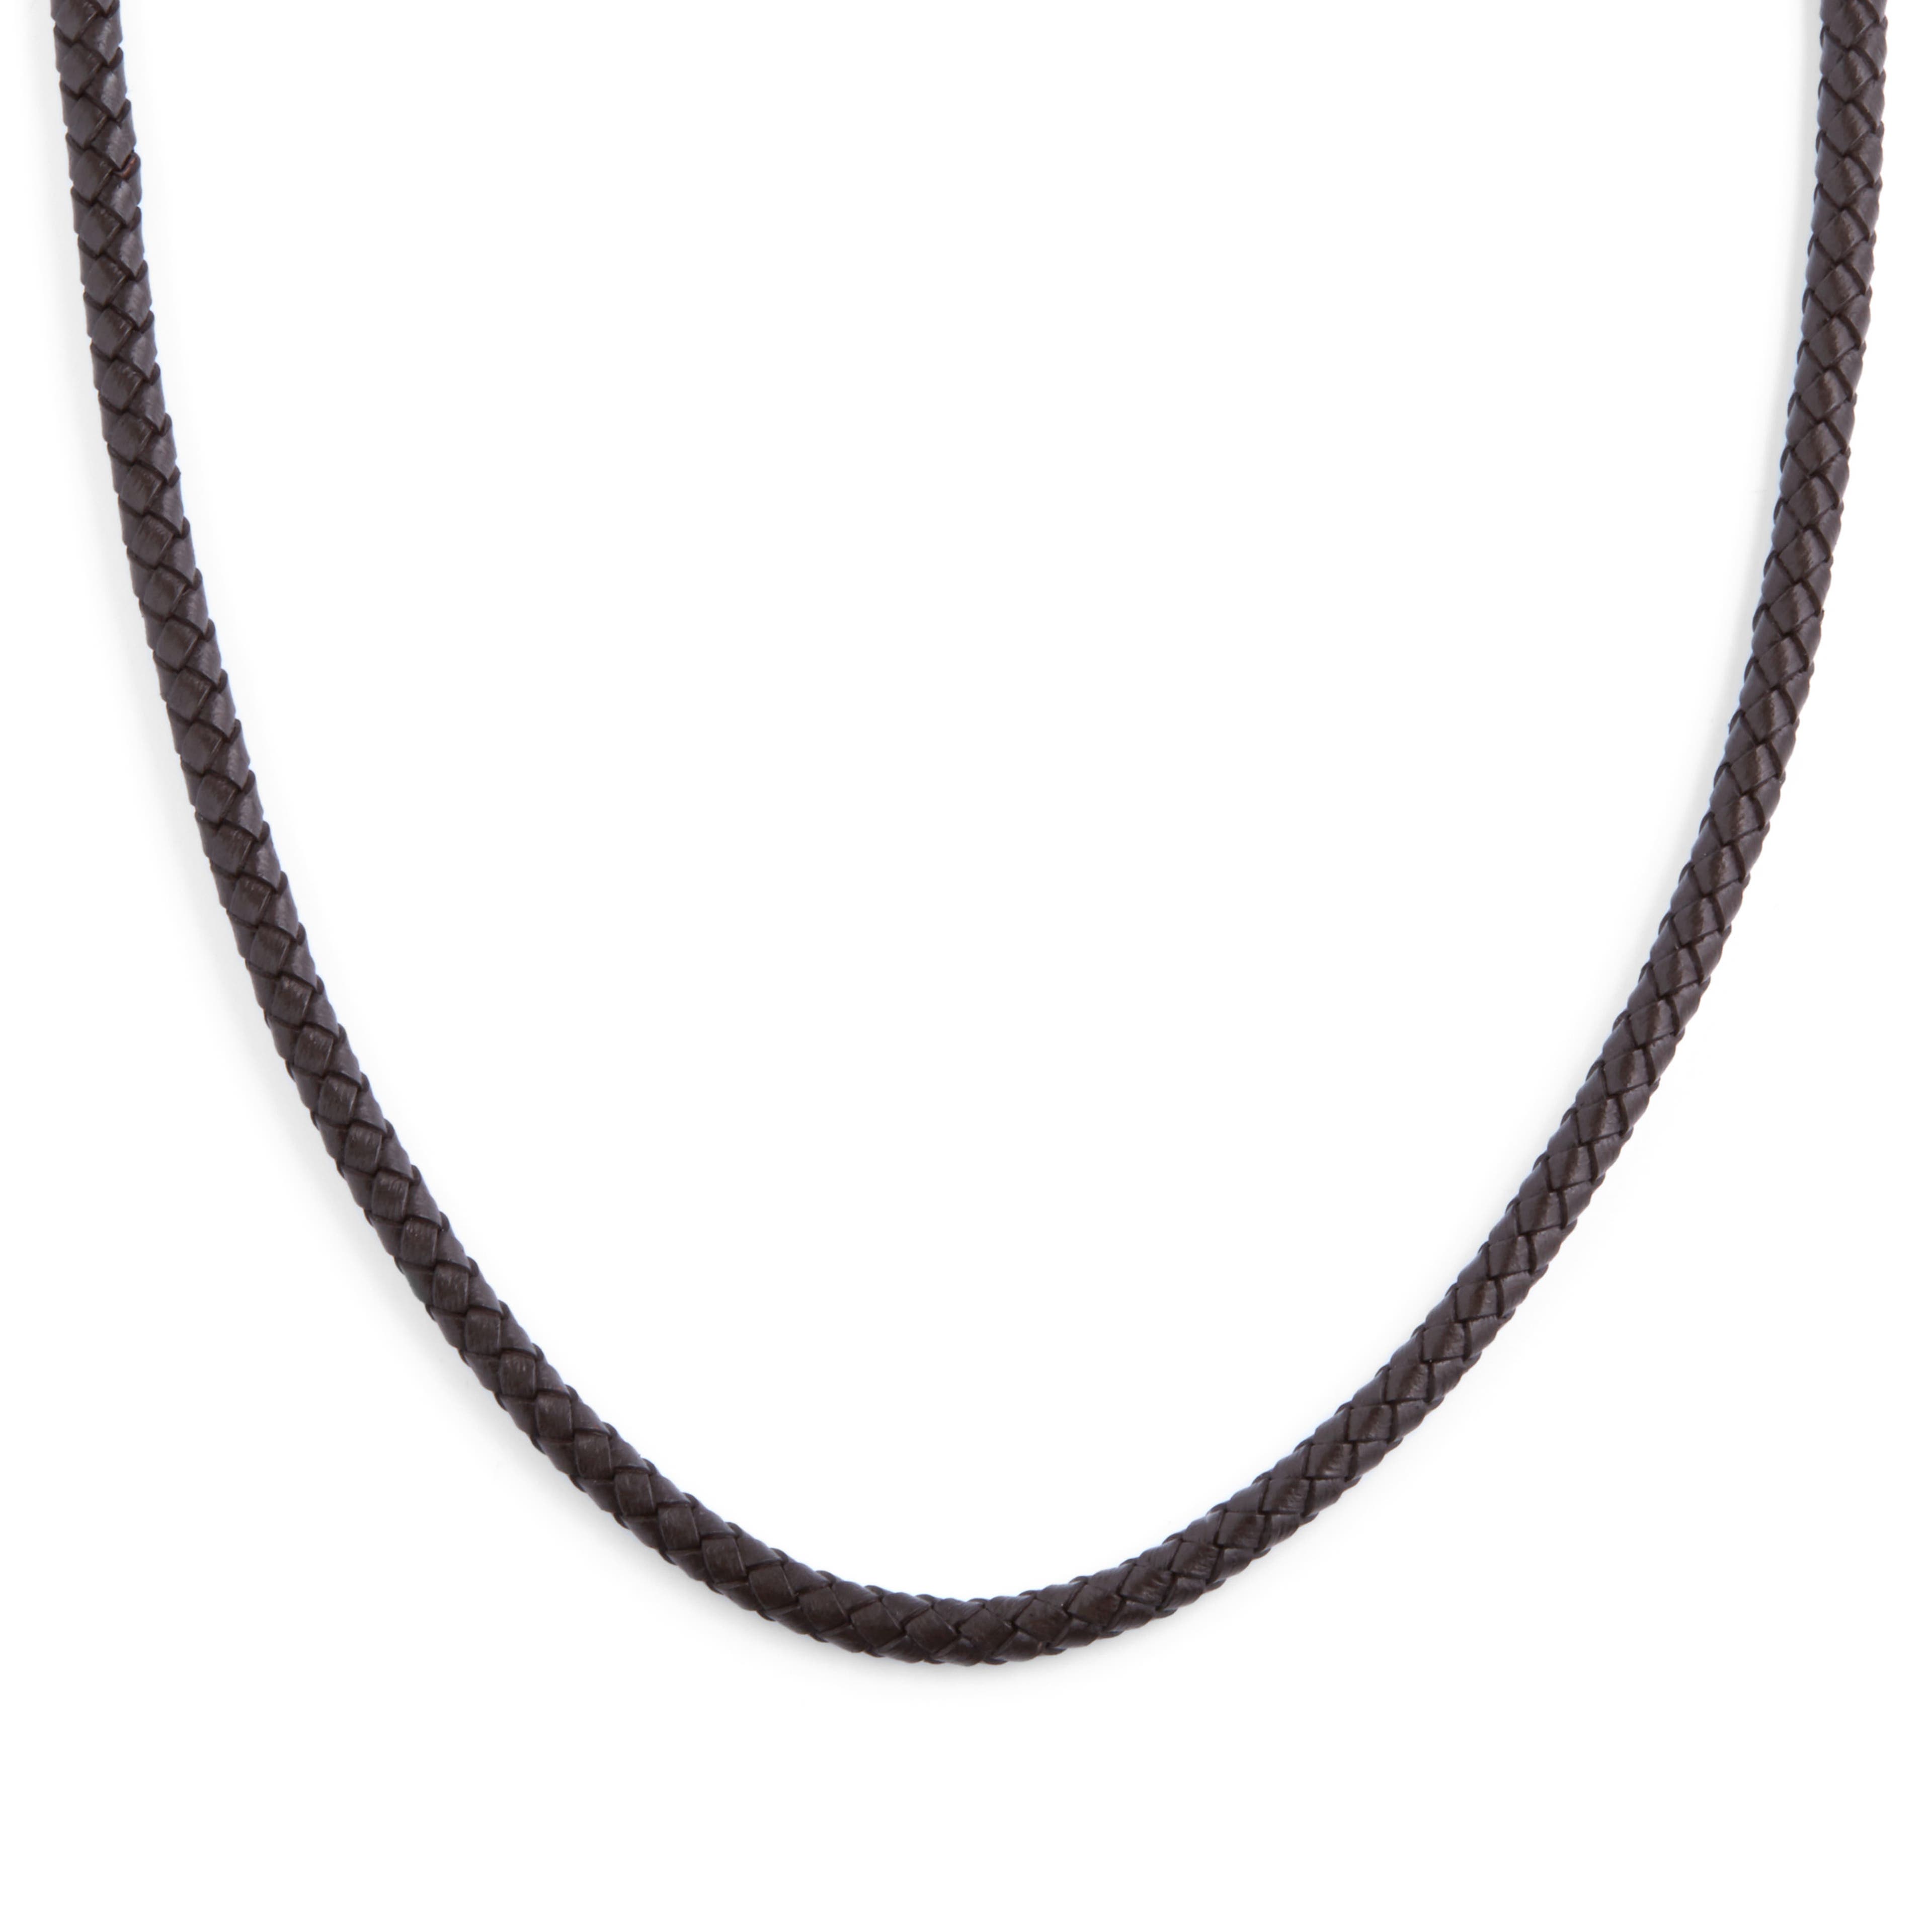 3 mm Brown Leather Woven Necklace